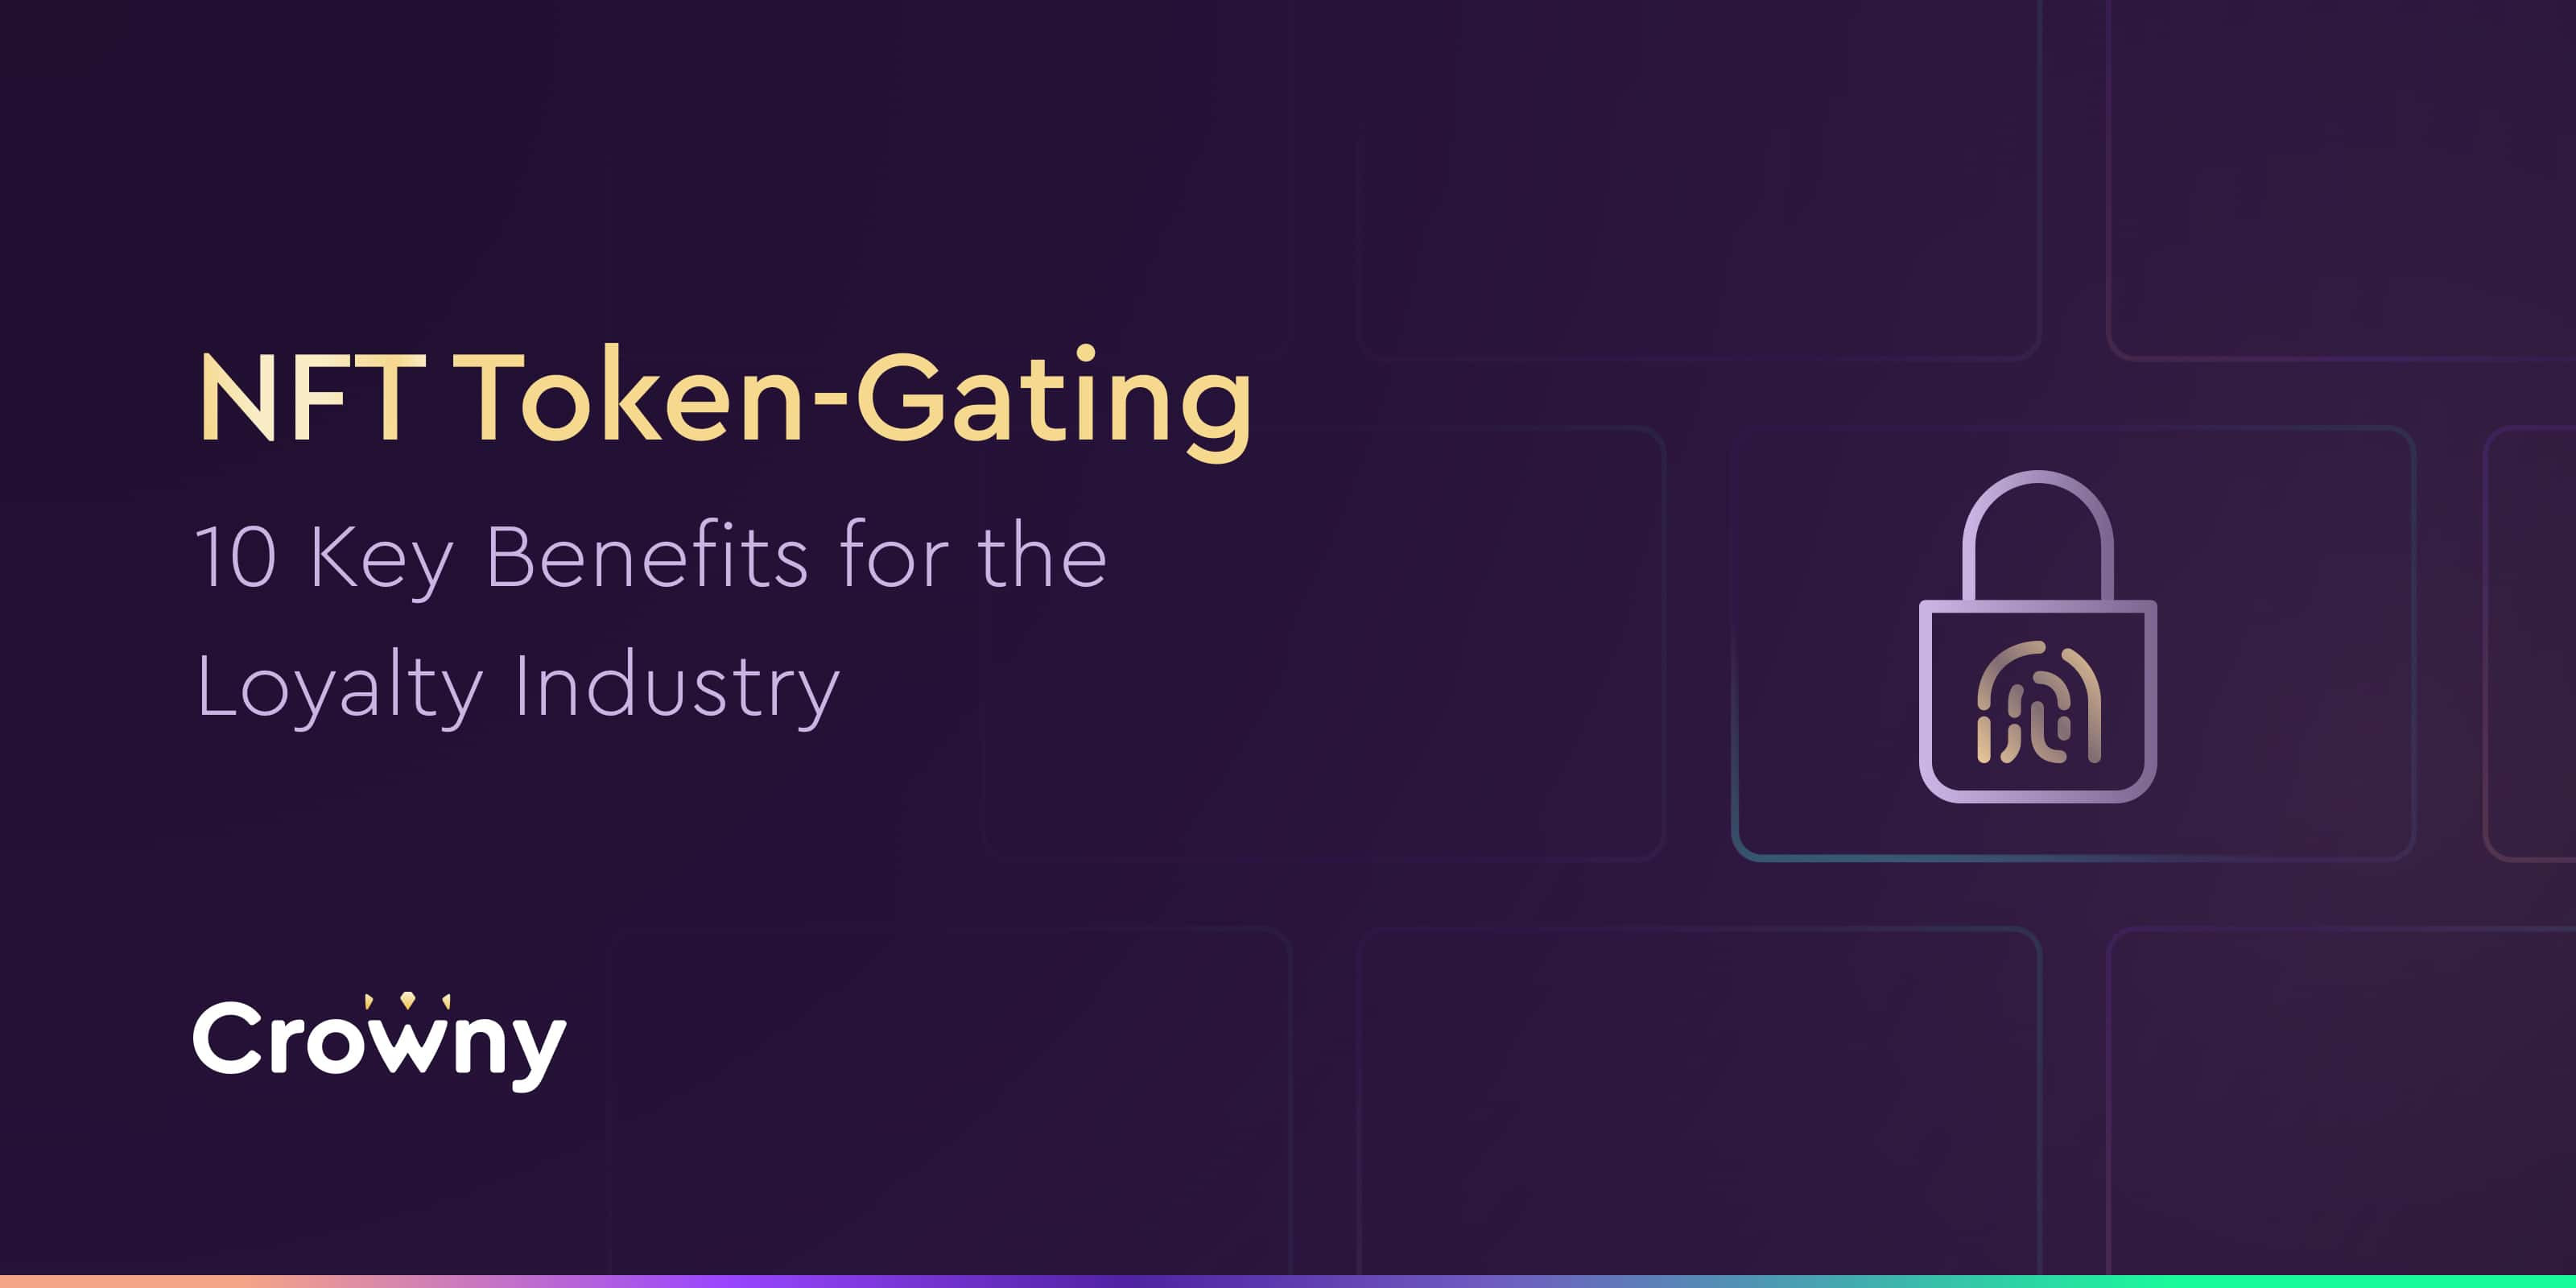 NFT Token-Gating for the Loyalty Industry